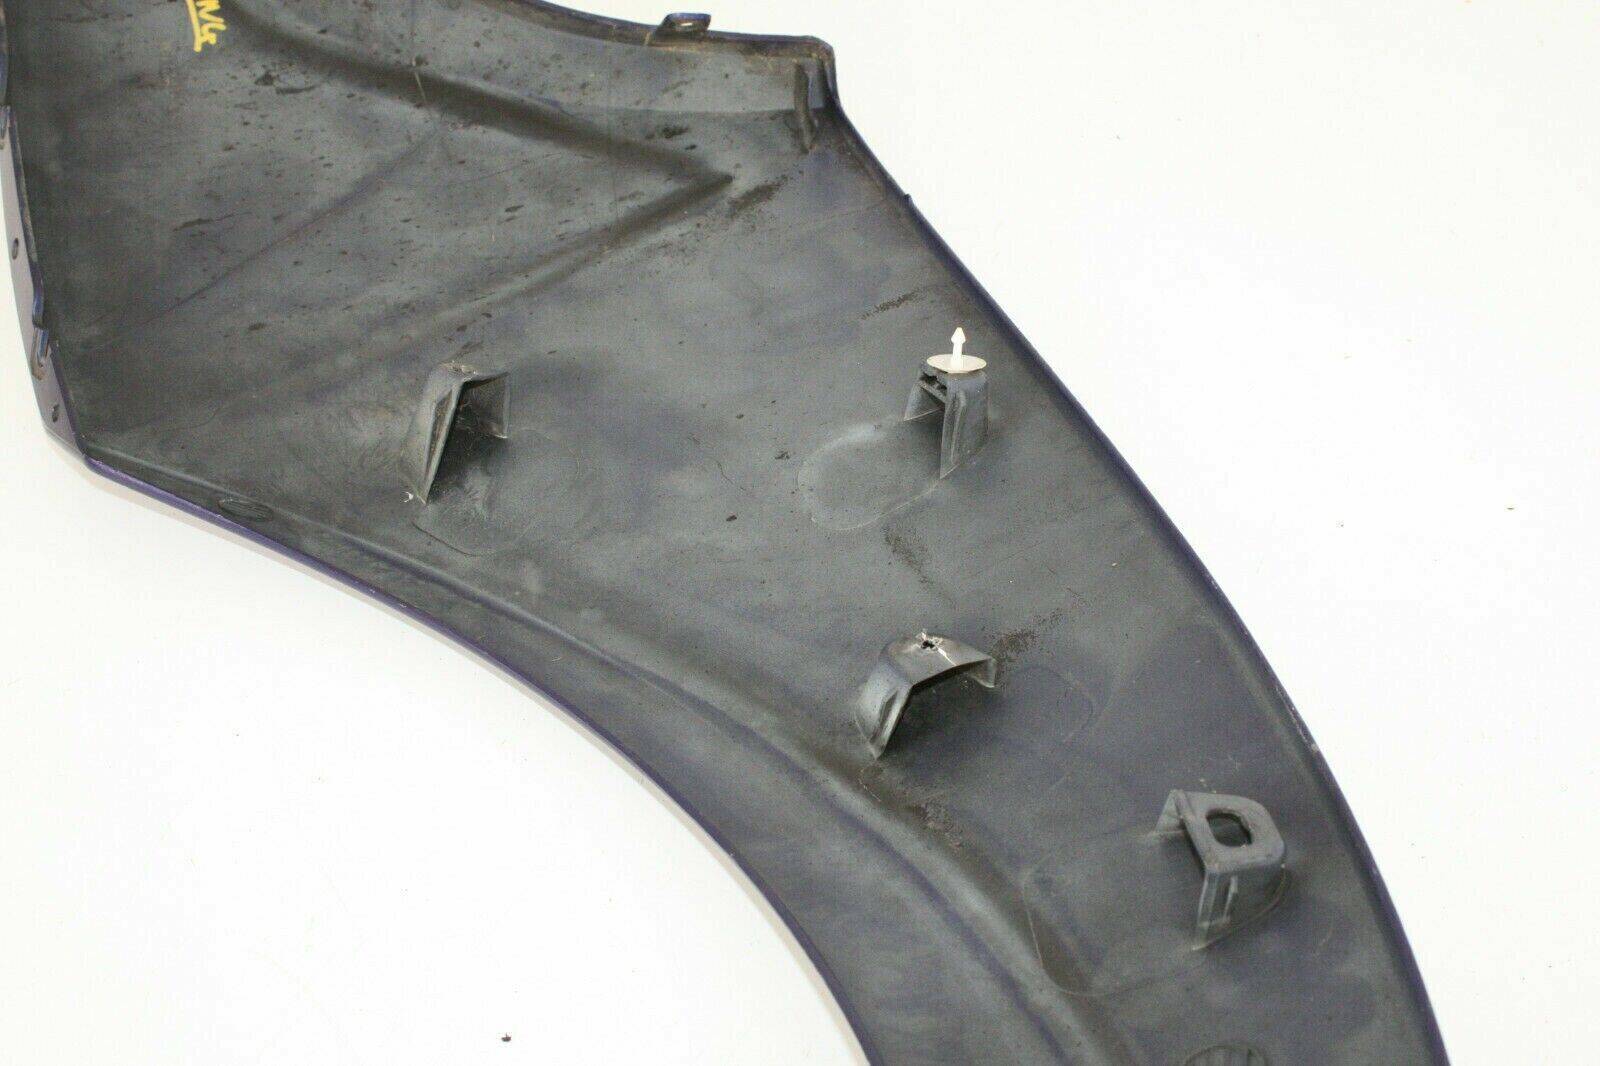 FORD-KA-SPORTKA-REAR-BUMPER-RIGHT-LOWER-SECTION-2003-TO-2008-175430905120-5